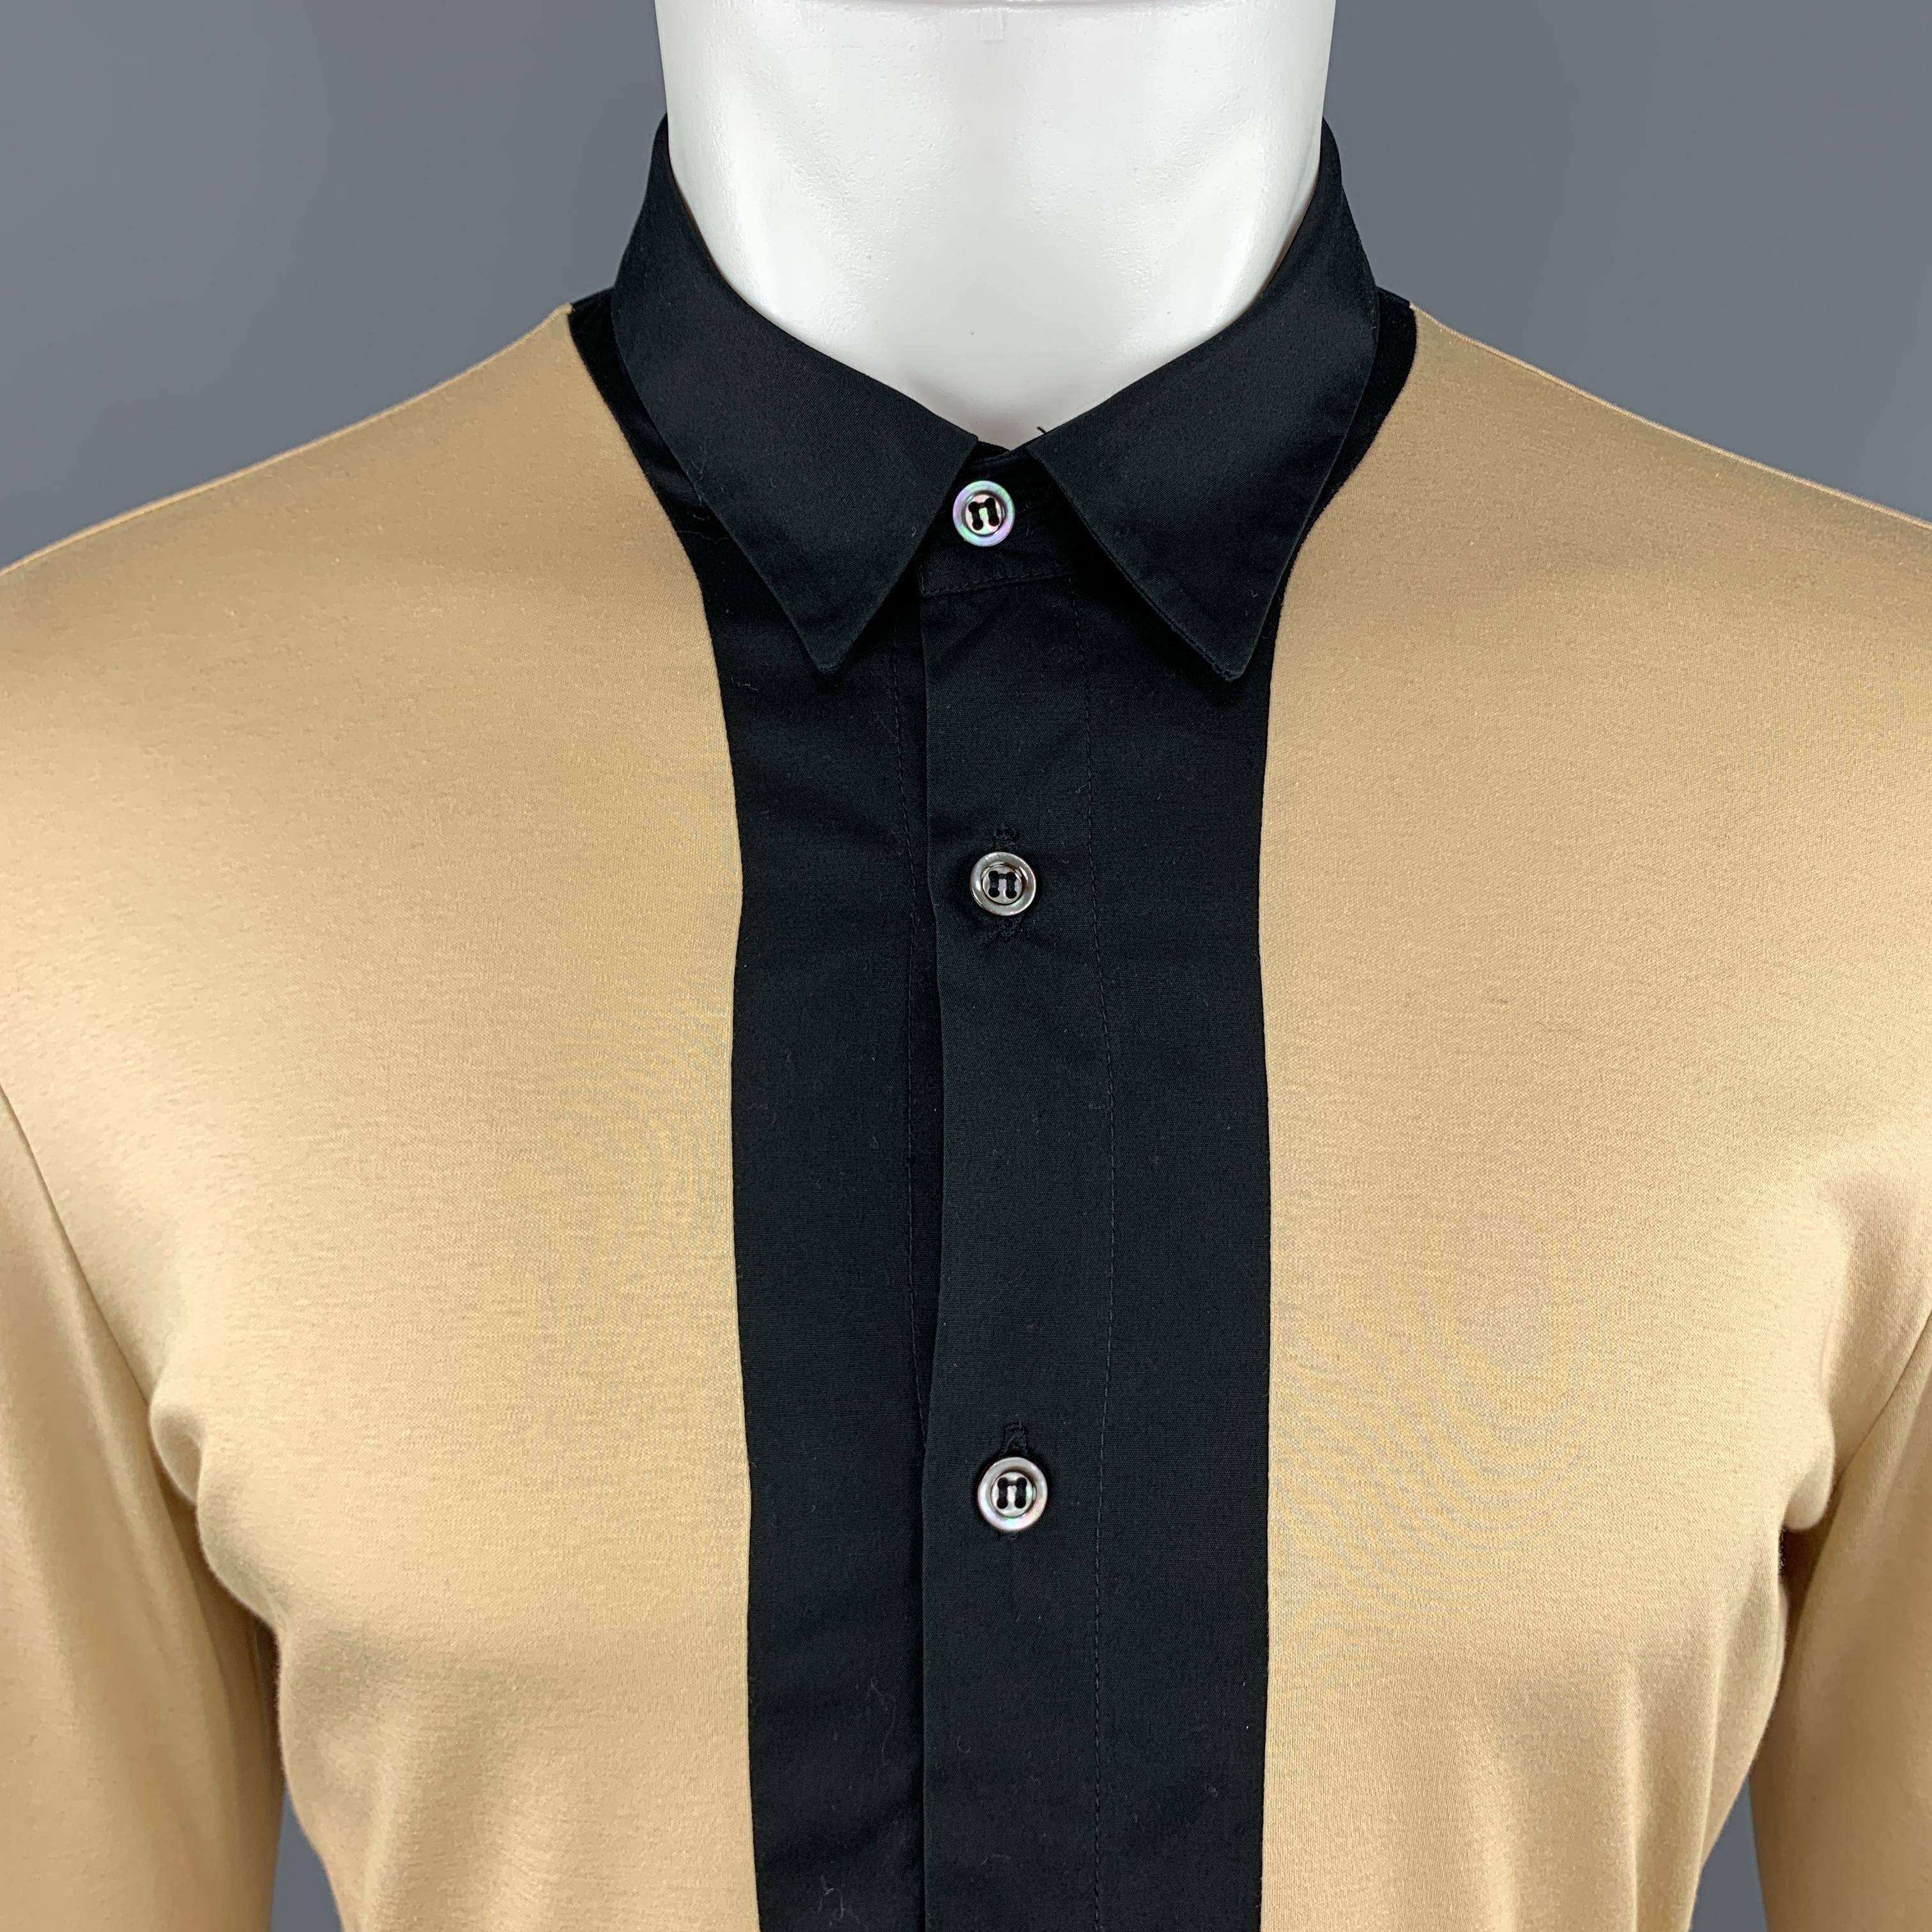 ALEXANDER MCQUEEN shirt comes in khaki beige cotton jersey with a black collared center panel and ribbed cuffs. Made in Italy.

Excellent Pre-Owned Condition.
Marked: L

Measurements:

Shoulder: 18 in.
Chest: 42 in.
Sleeve: 27.5 in.
Length: 28.5 in.